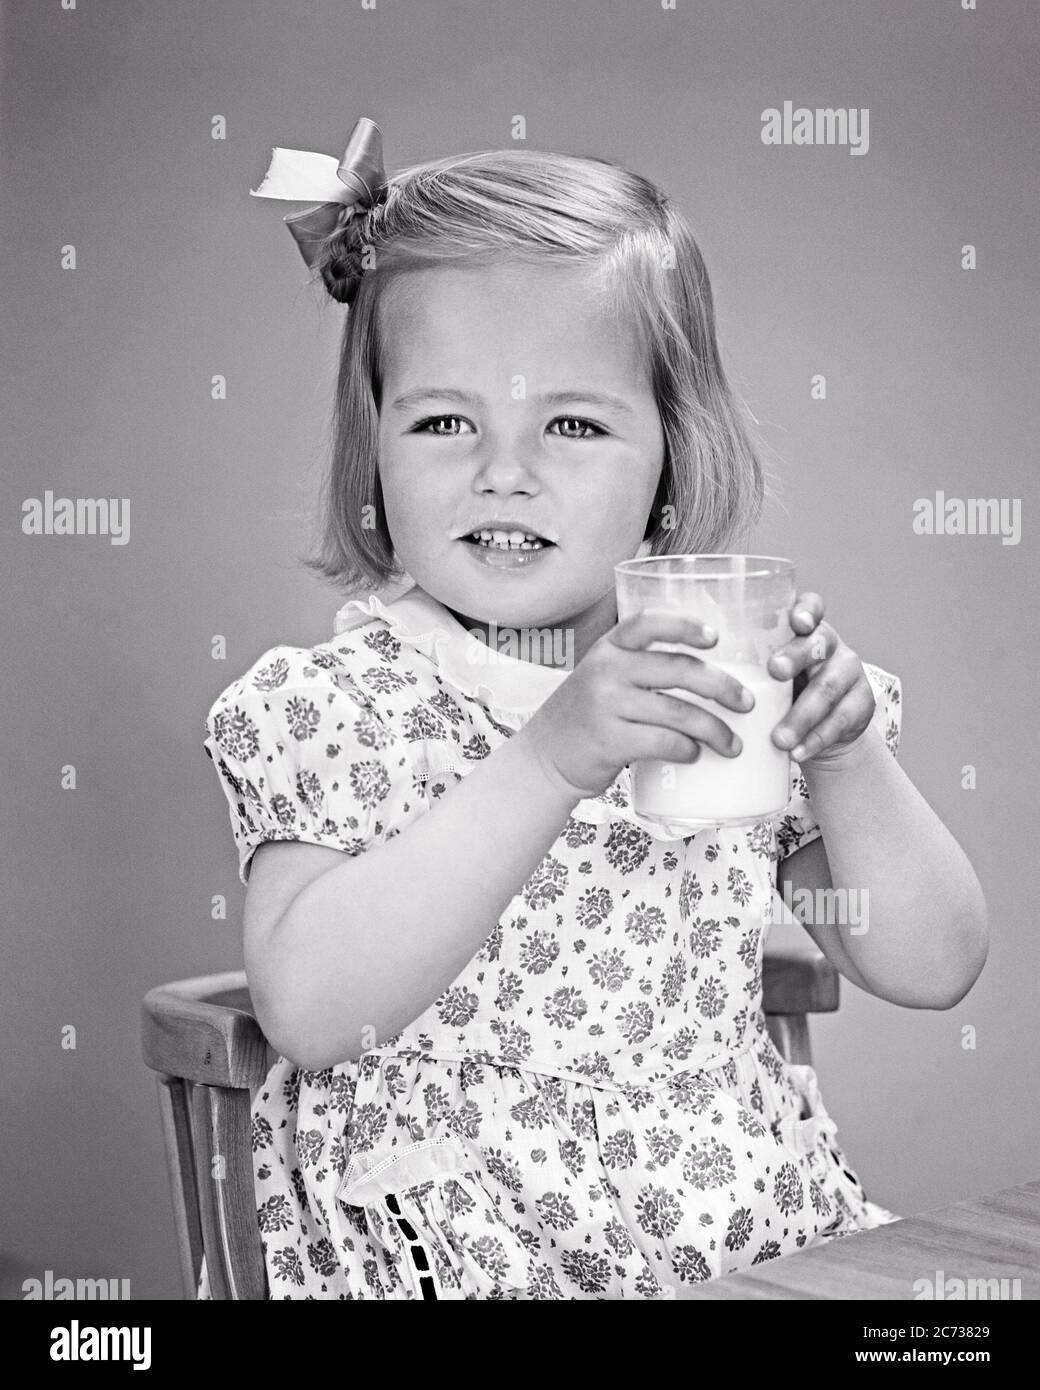 1940s LITTLE BLONDE GIRL BOW IN HER HAIR PRINT DRESS DRINKING A GLASS OF MILK SITTING AT CHILD’S TABLE AND CHAIR - f369 HAR001 HARS STUDIO SHOT HEALTHINESS HOME LIFE DAIRY COPY SPACE HALF-LENGTH B&W HAPPINESS WELLNESS BEVERAGE AND FLUID PRINT DRESS CONSUME CONSUMING HYDRATION CHILD'S GROWTH JUVENILES PROTEIN REFRESHING BEVERAGES BLACK AND WHITE CAUCASIAN ETHNICITY HAR001 OLD FASHIONED Stock Photo